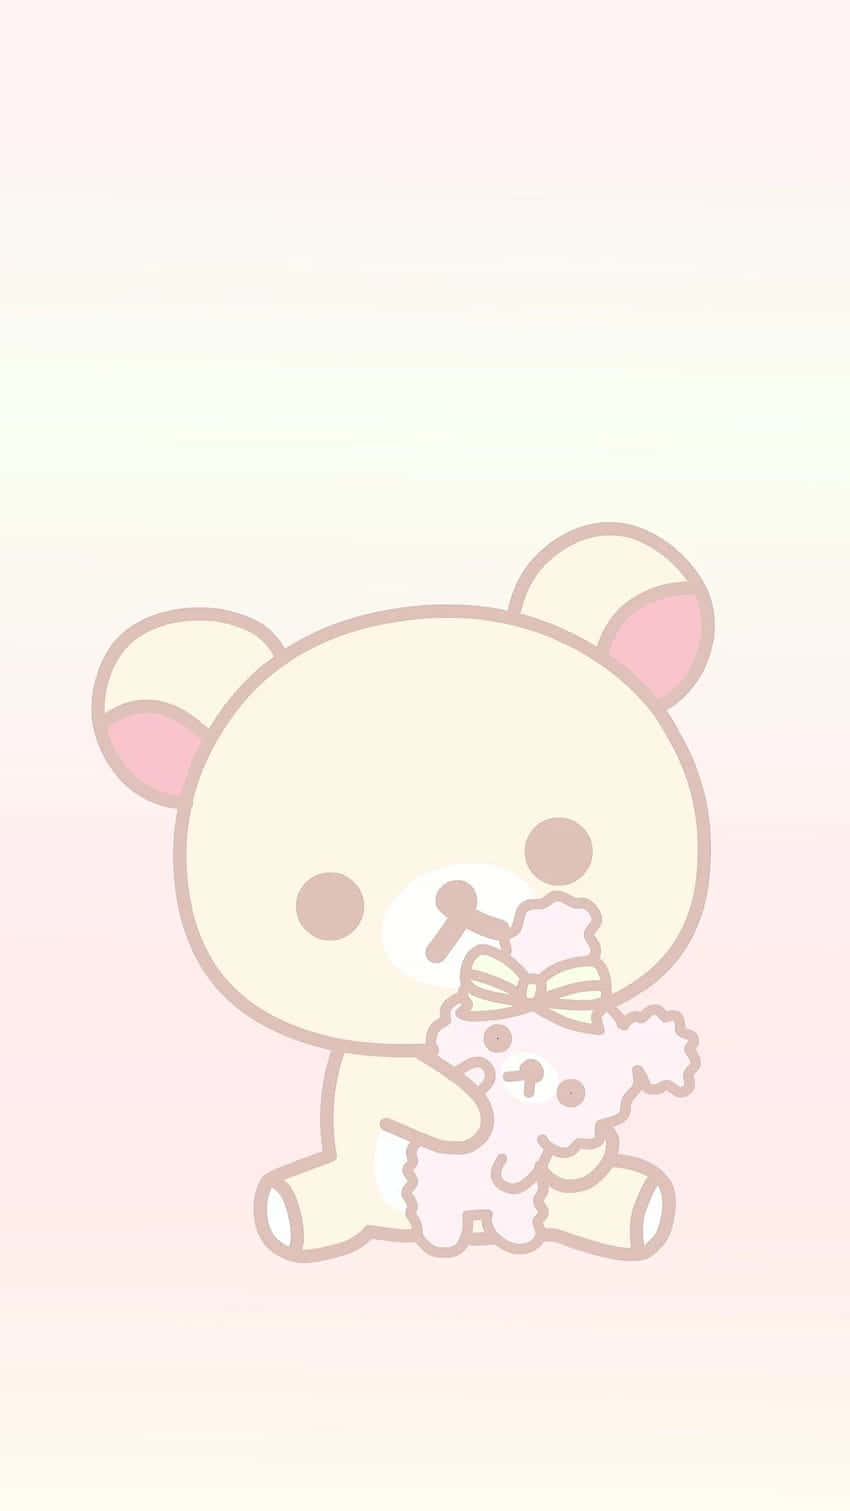 "Welcome a bit of sunshine and joy into your life with Cute Rilakkuma" Wallpaper